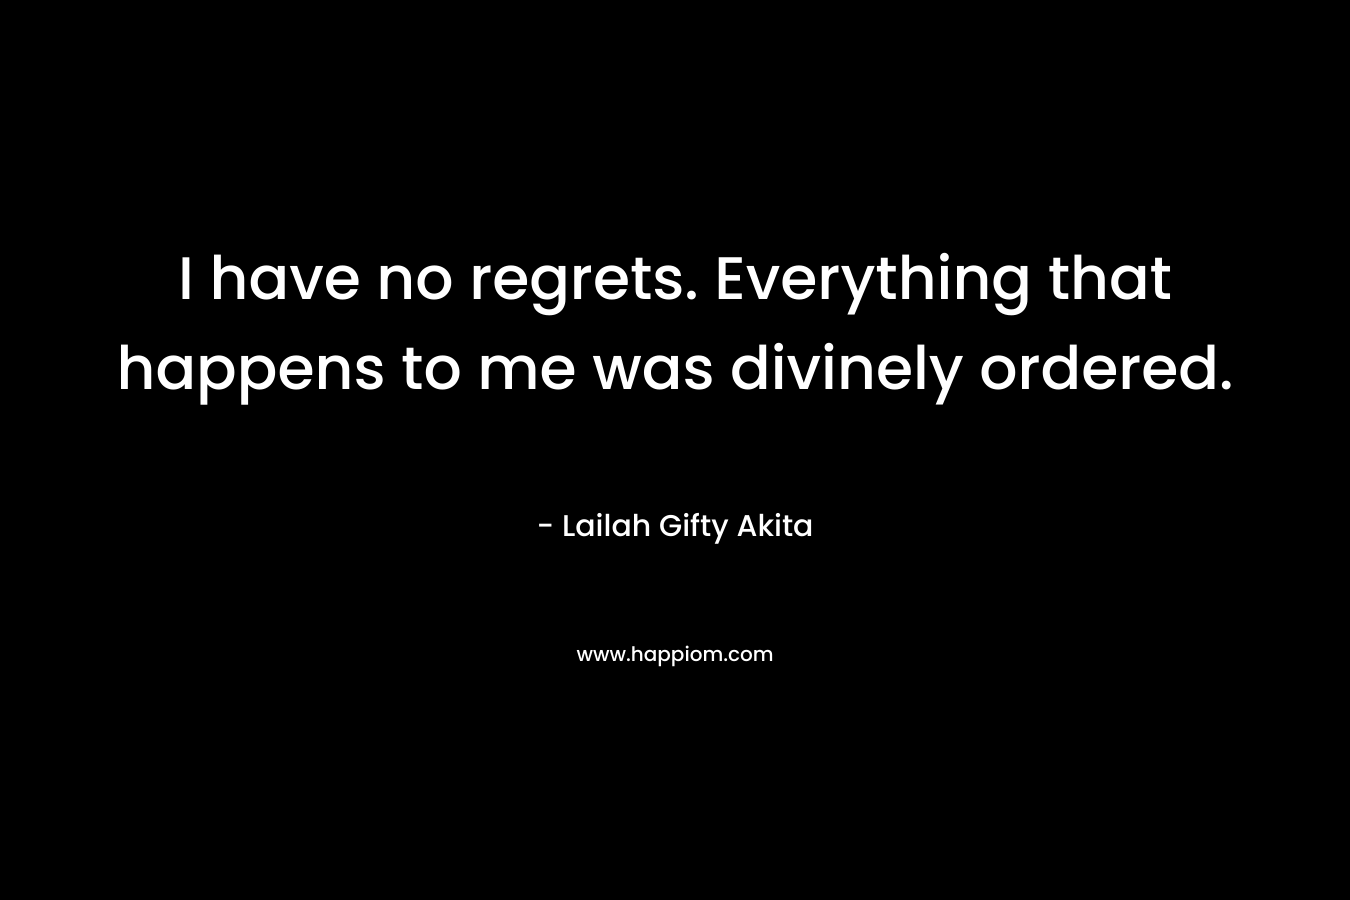 I have no regrets. Everything that happens to me was divinely ordered.